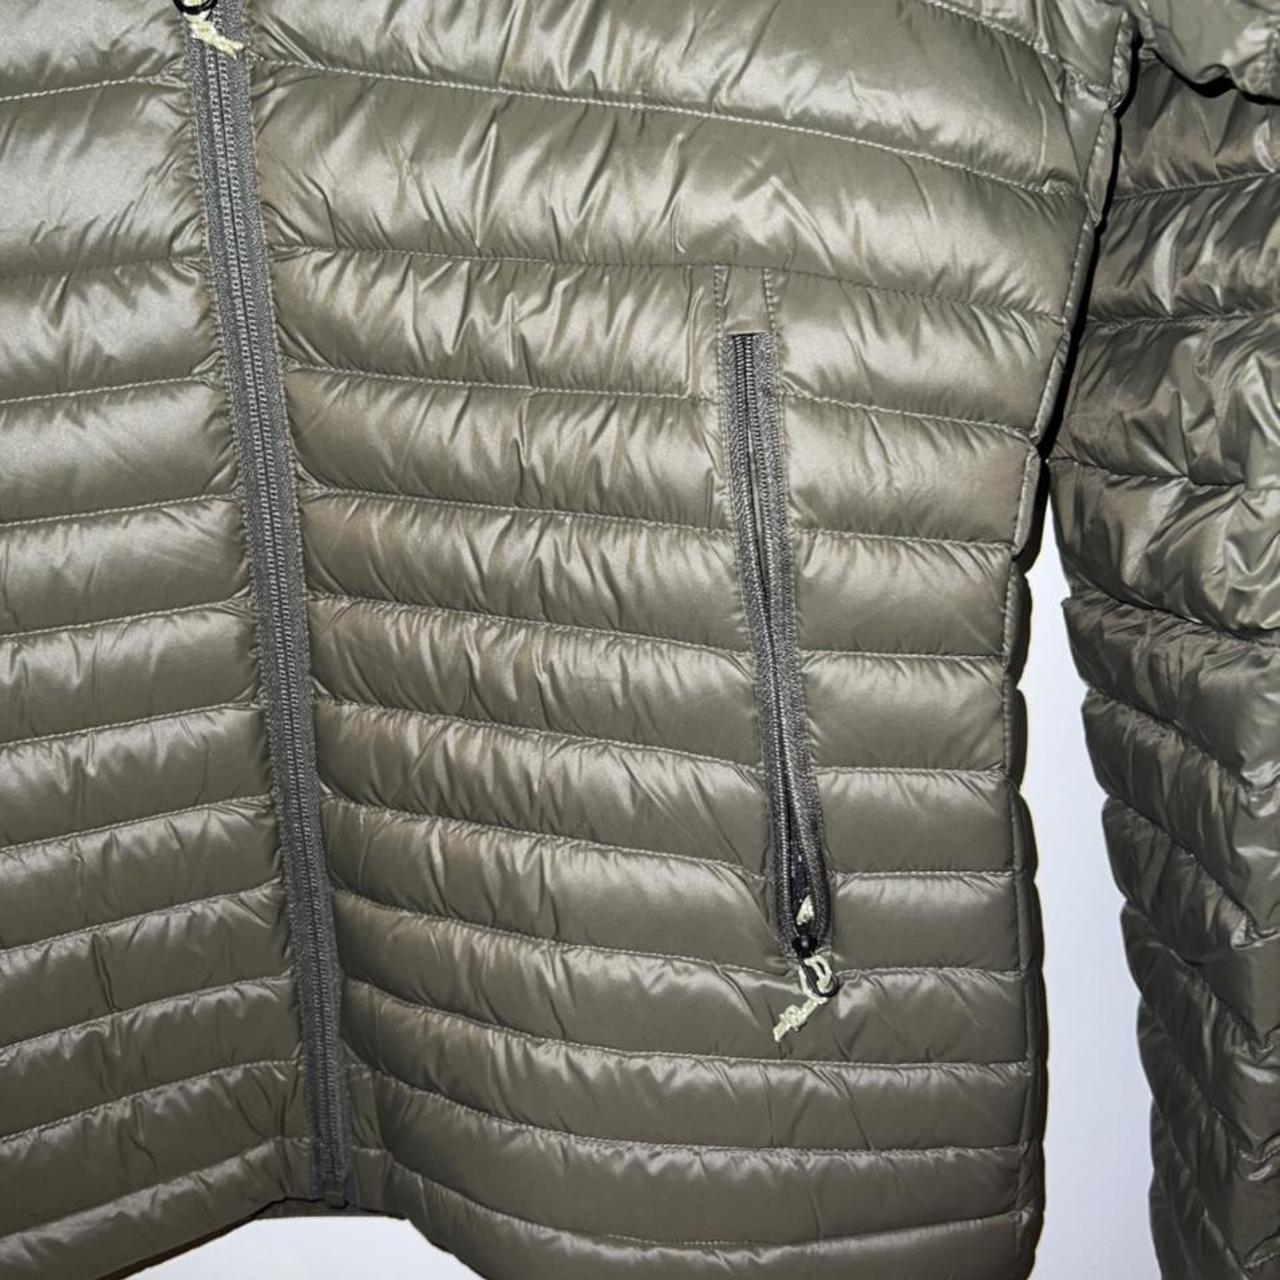 Product Image 4 - Decathlon Packable Puffer
#coat #puffer #green